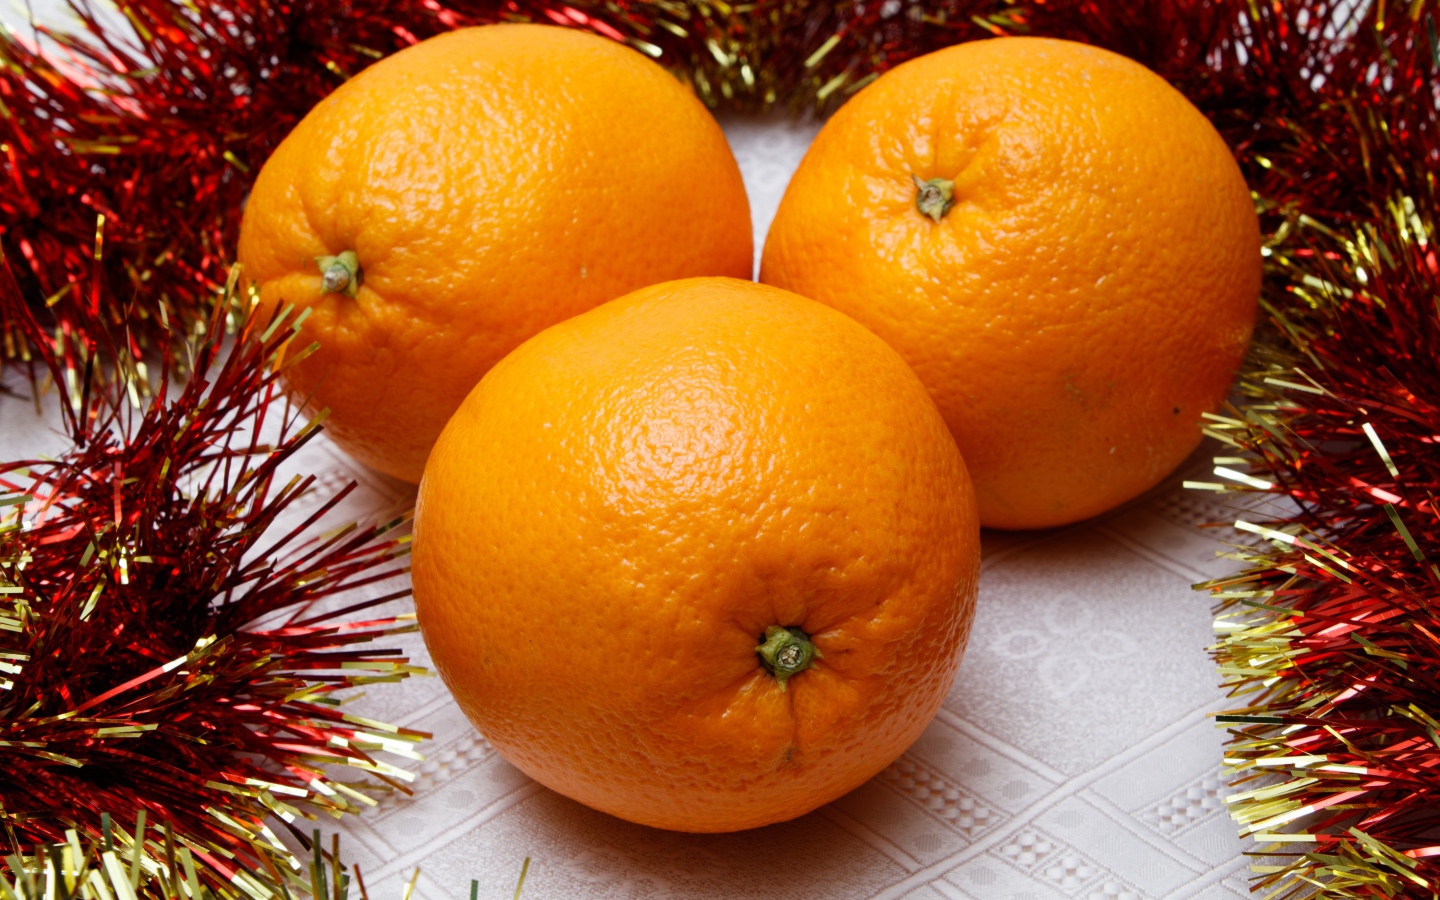 Three large oranges on the table with tinsel